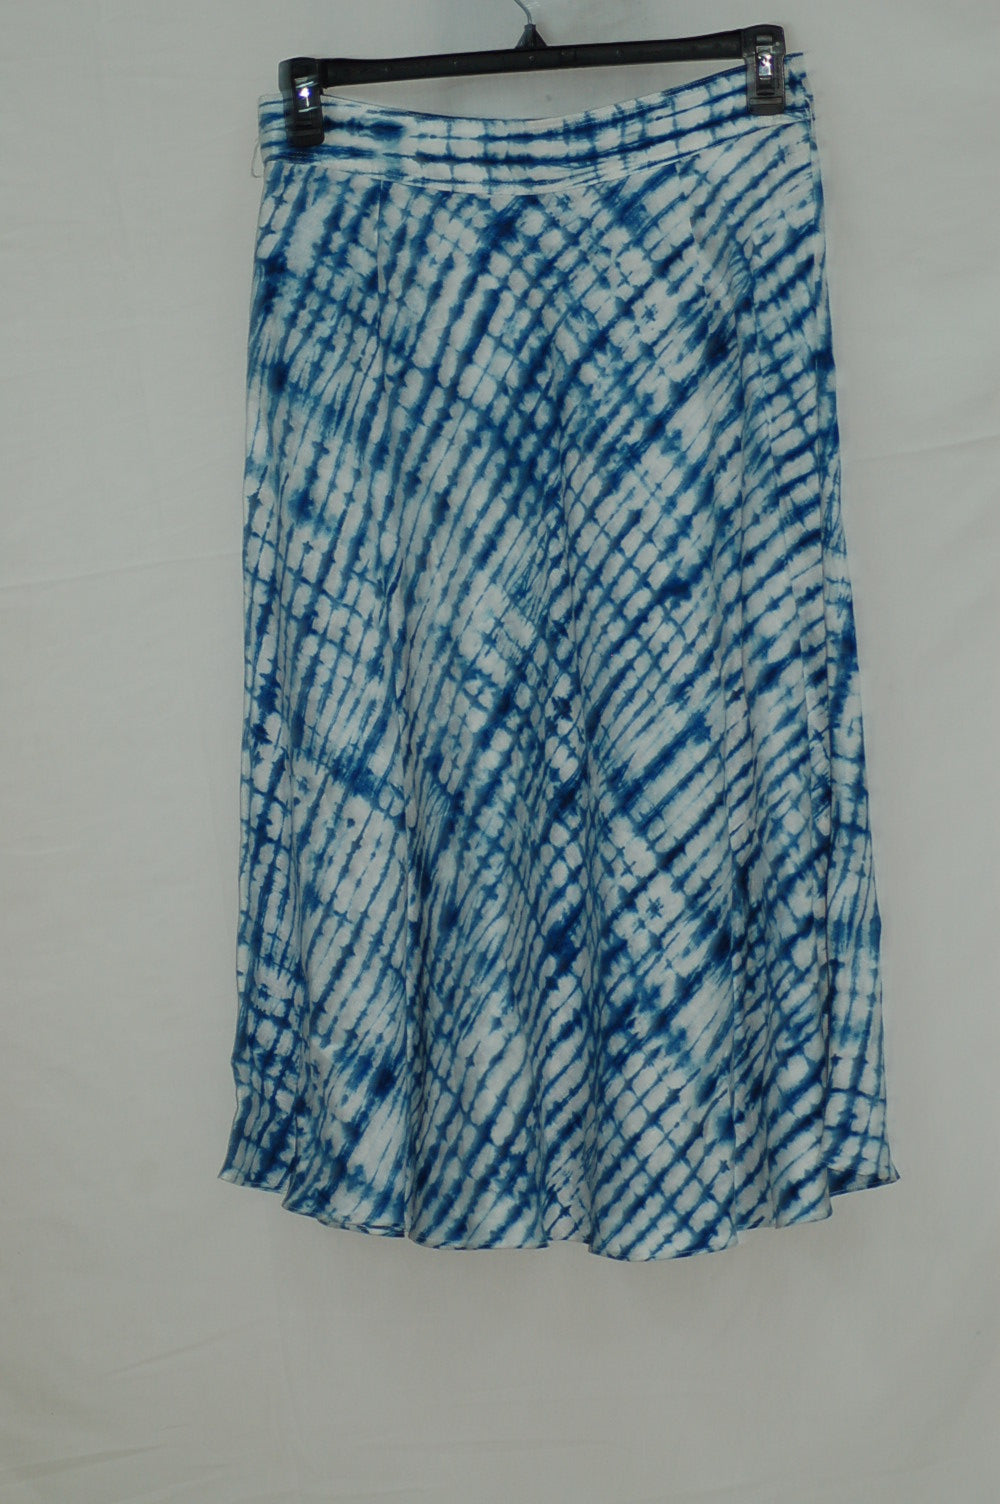 DKNY WOMEN'S PLAID PRINT SKIRT, BLUE, SIZE 4- NEW WITHOUT TAG 10666